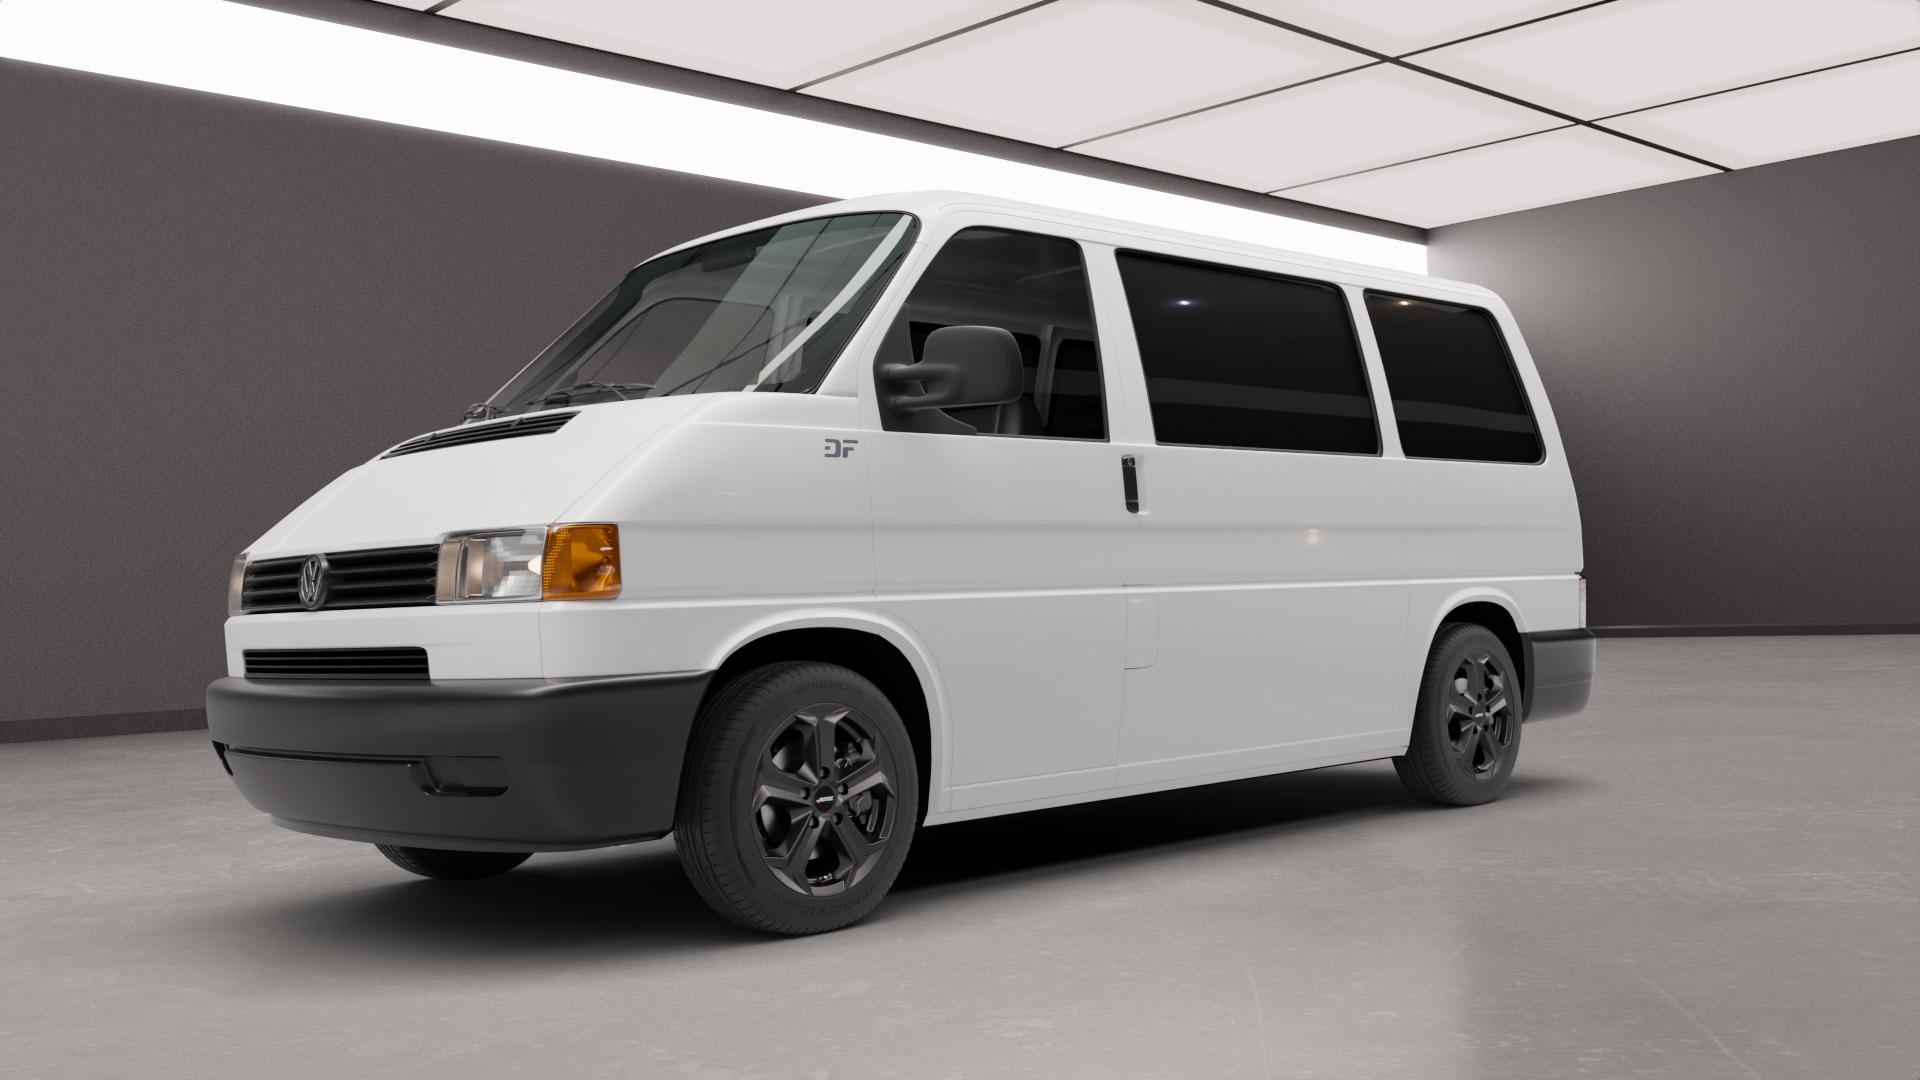 Volkswagen (VW) T4 Caravelle 2,5l TDI Syncro 75kW (102 hp) Wheels and Tyre  Packages | velonity.com